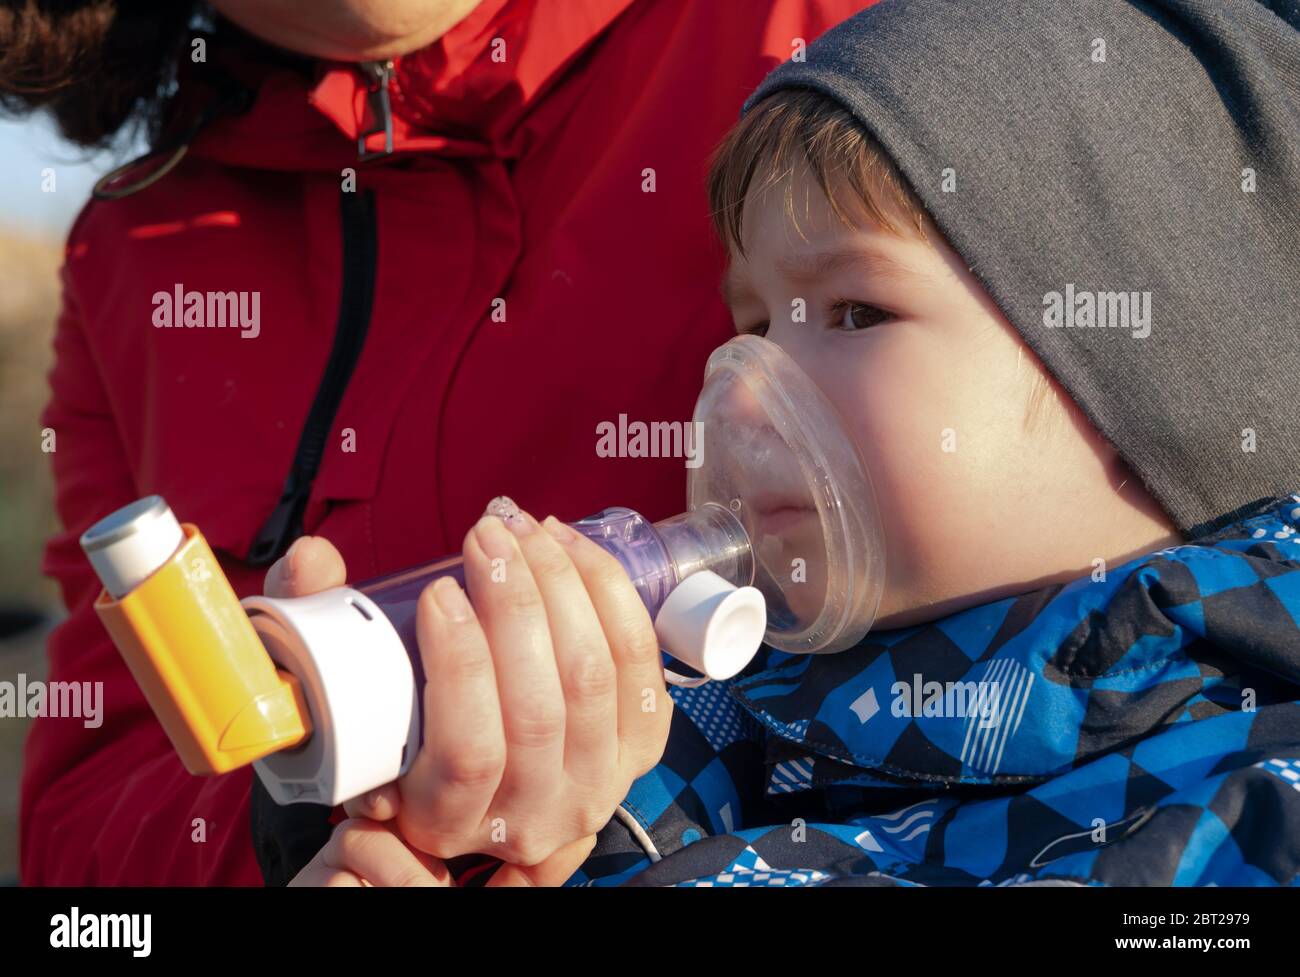 A small boy who suffering from illness bronchial asthma getting treatment with aerosol inhaler outdoors Stock Photo